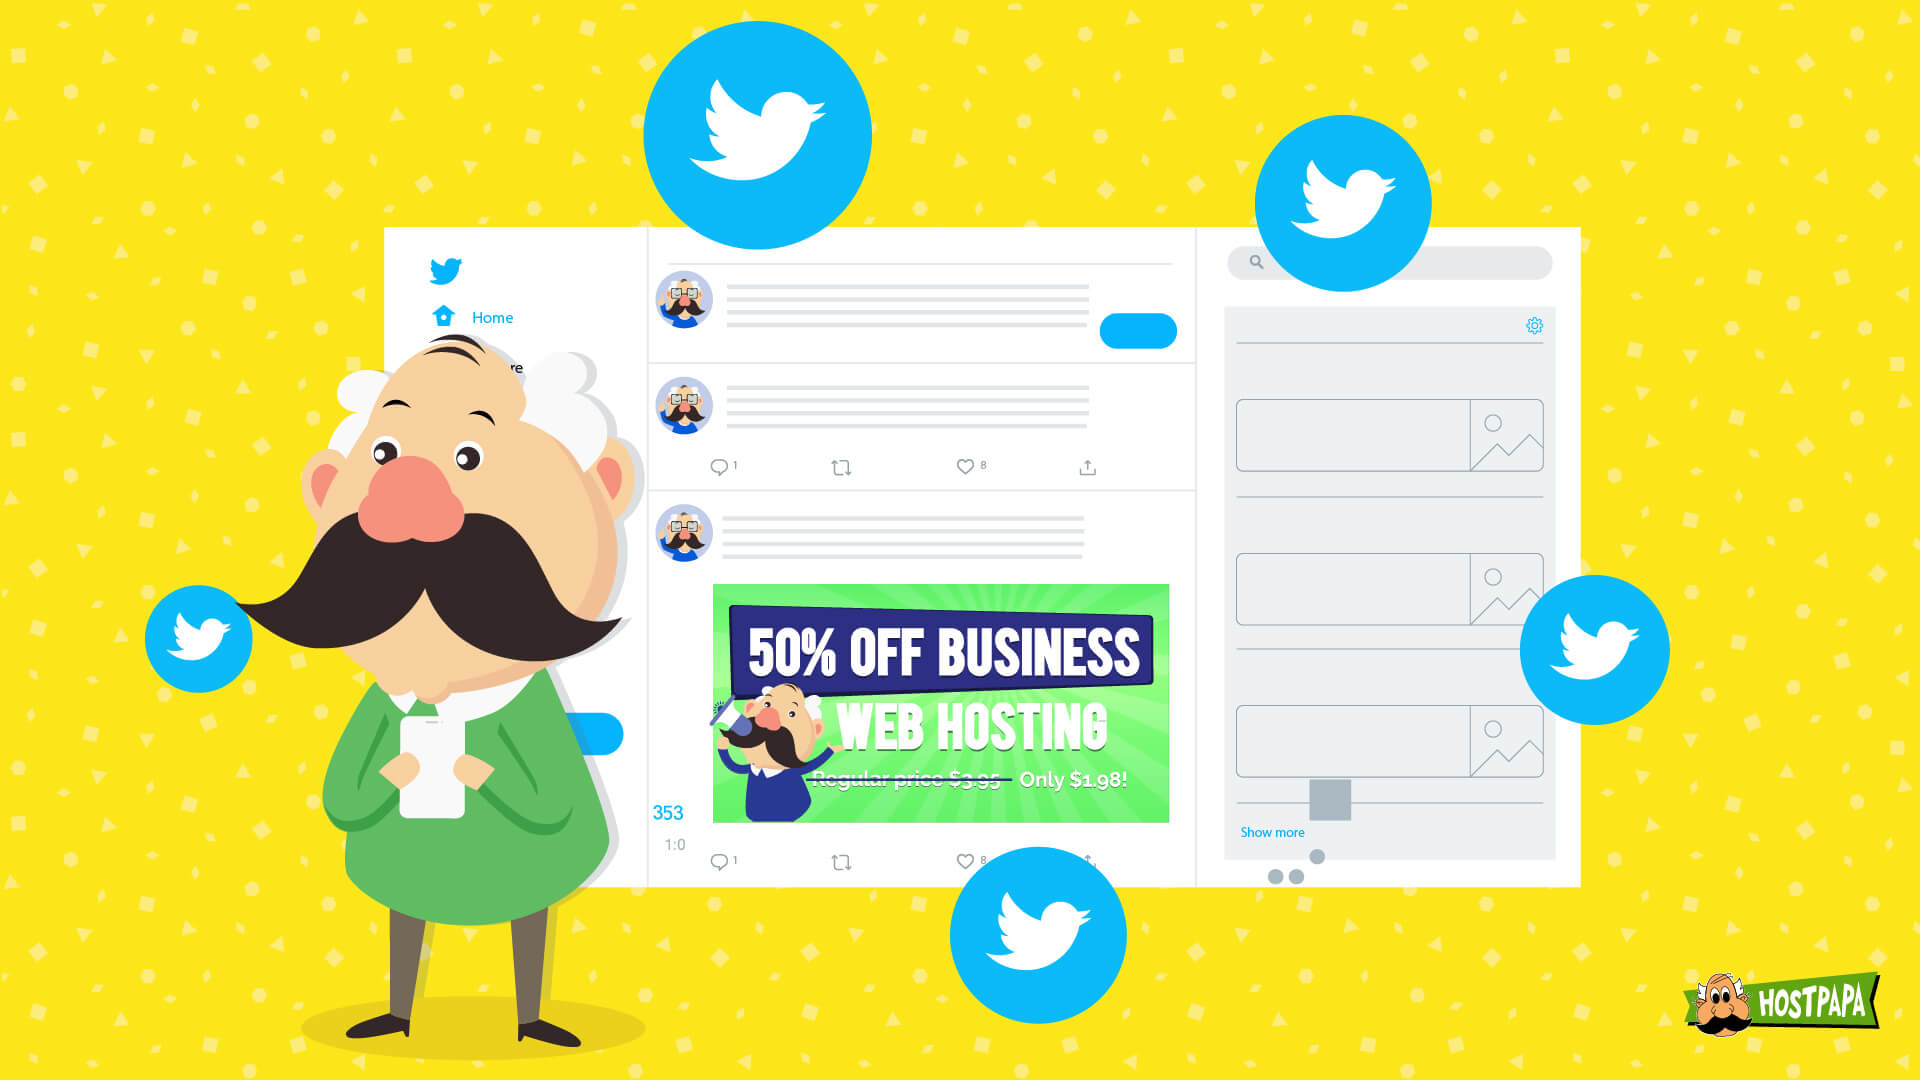 Check these tips for your Twitter's small business